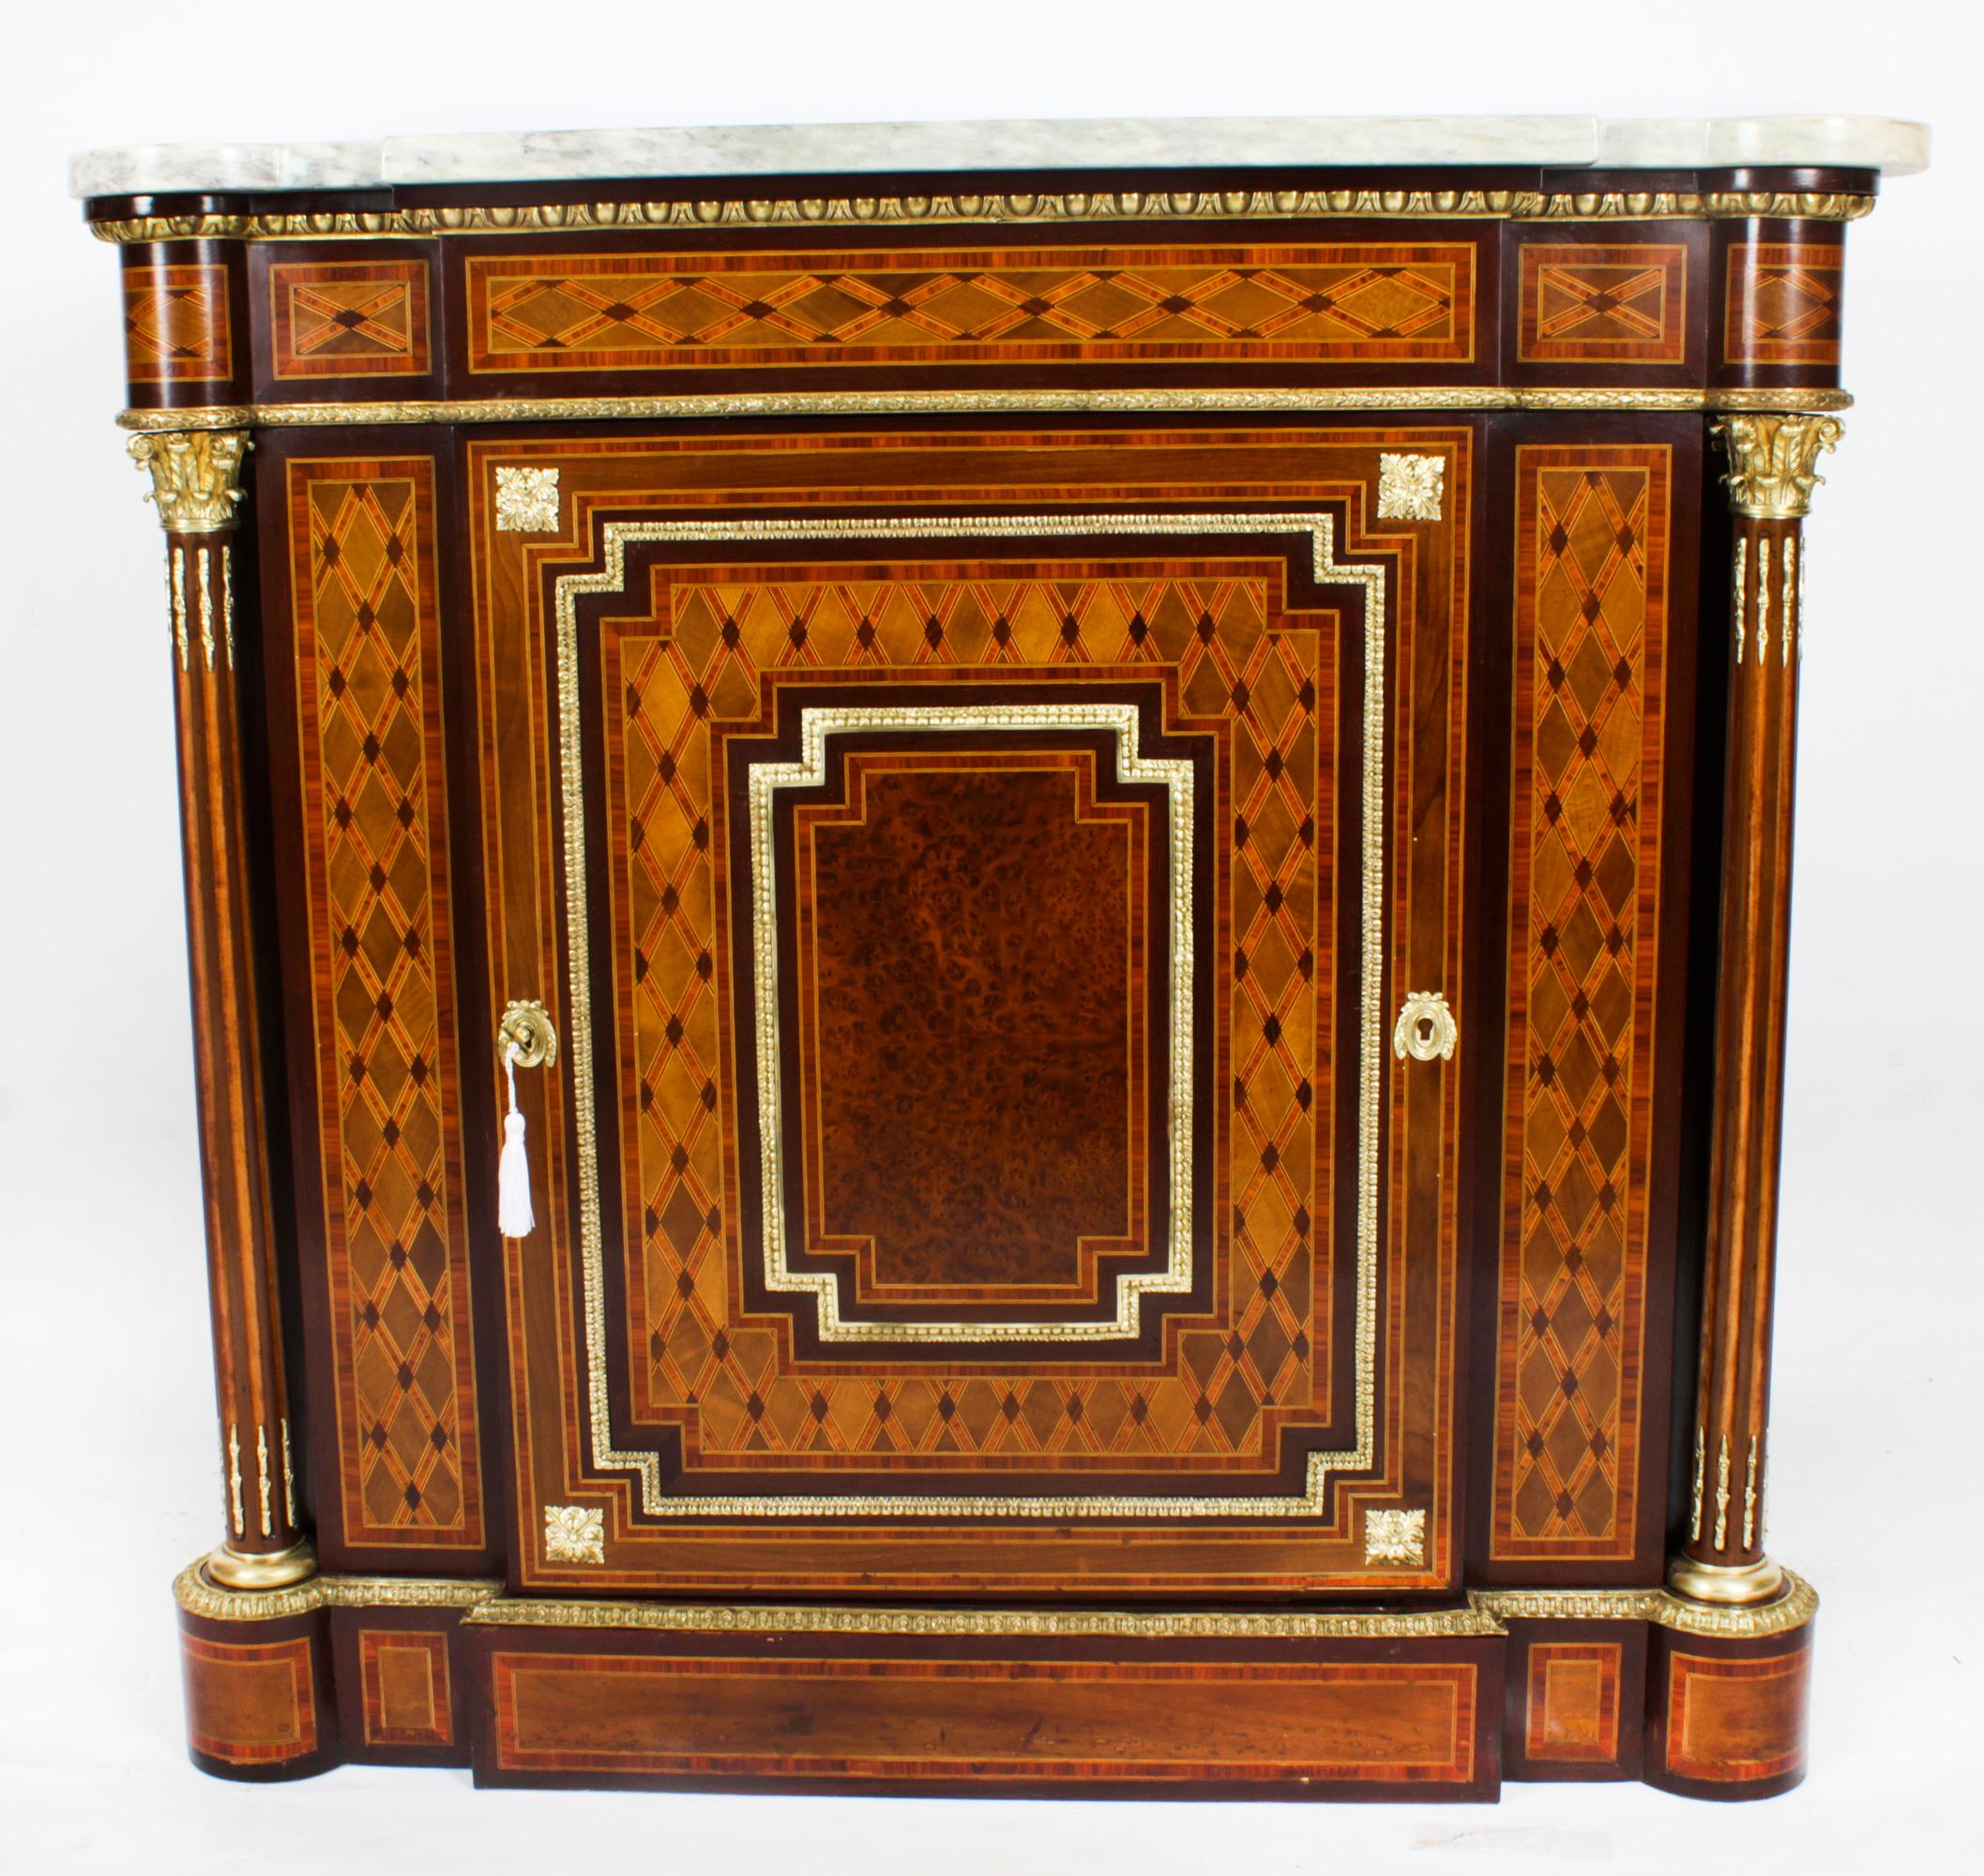 This is a fabulous antique French Napoleon III burr walnut, bois de violette and ormolu mounted parquetry pier cabinet surmounted with the original striking Pierre Gris, marble top, circa 1860 in date.
 
The cabinet has an elegant geometric mosaic